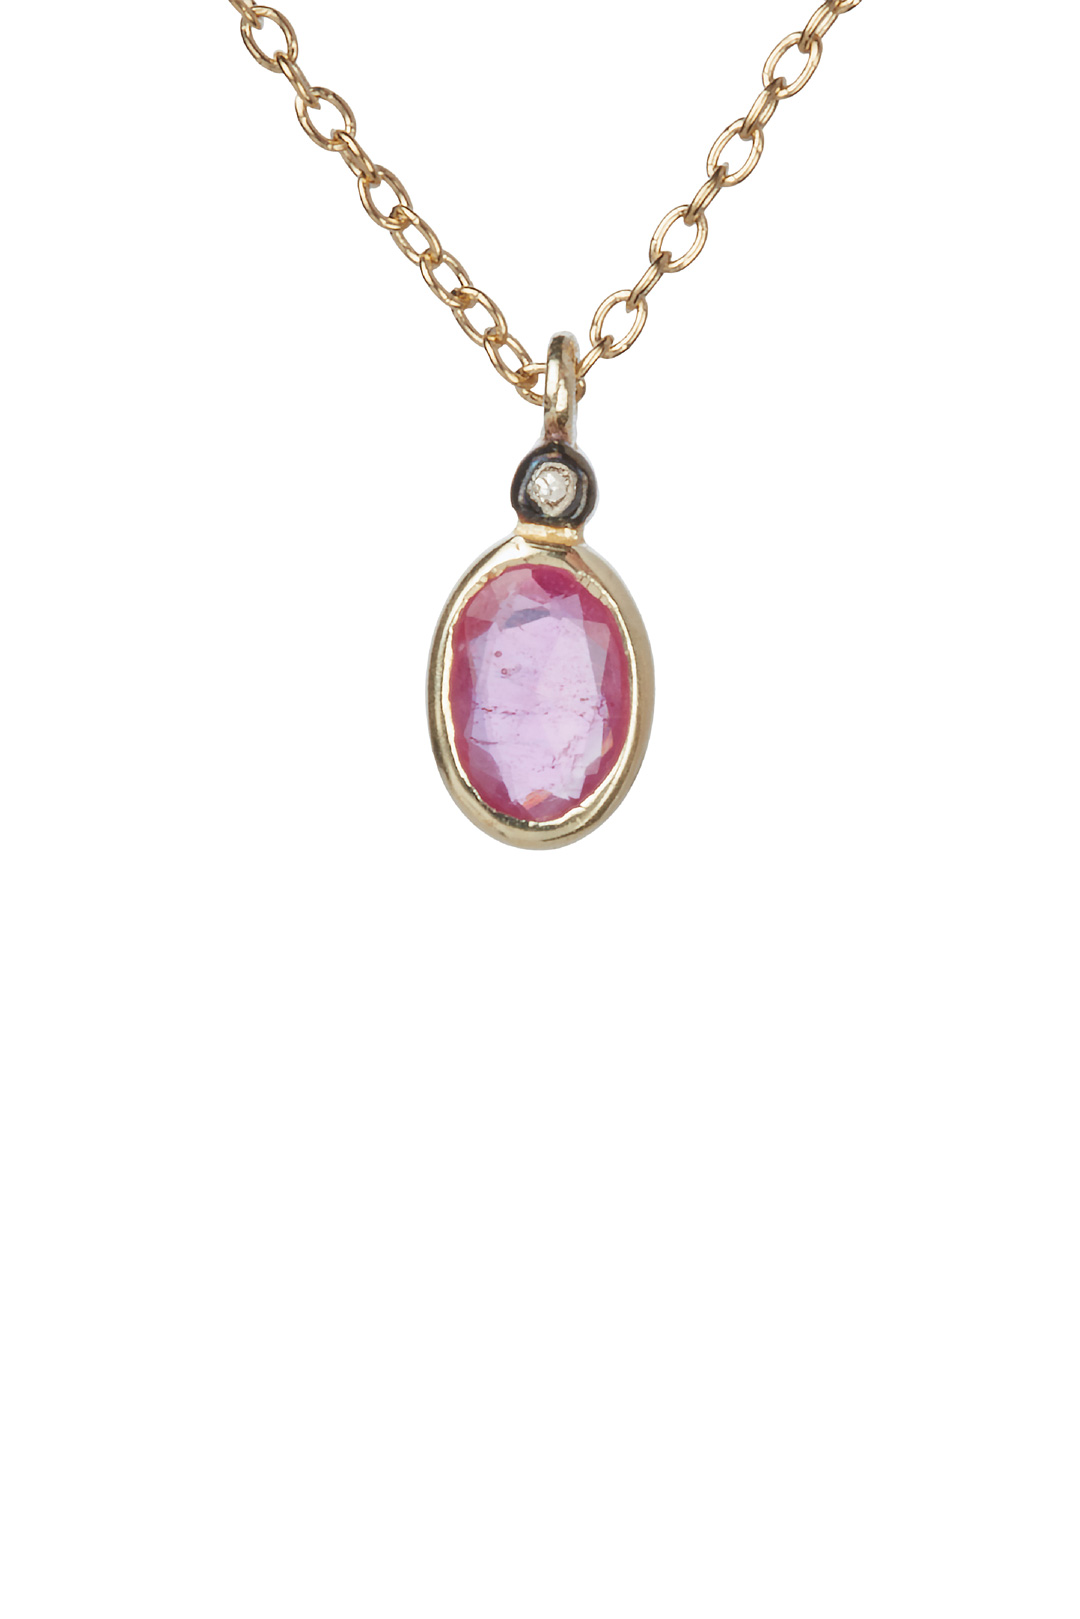 5 OCTOBRE Collier ABY Pink